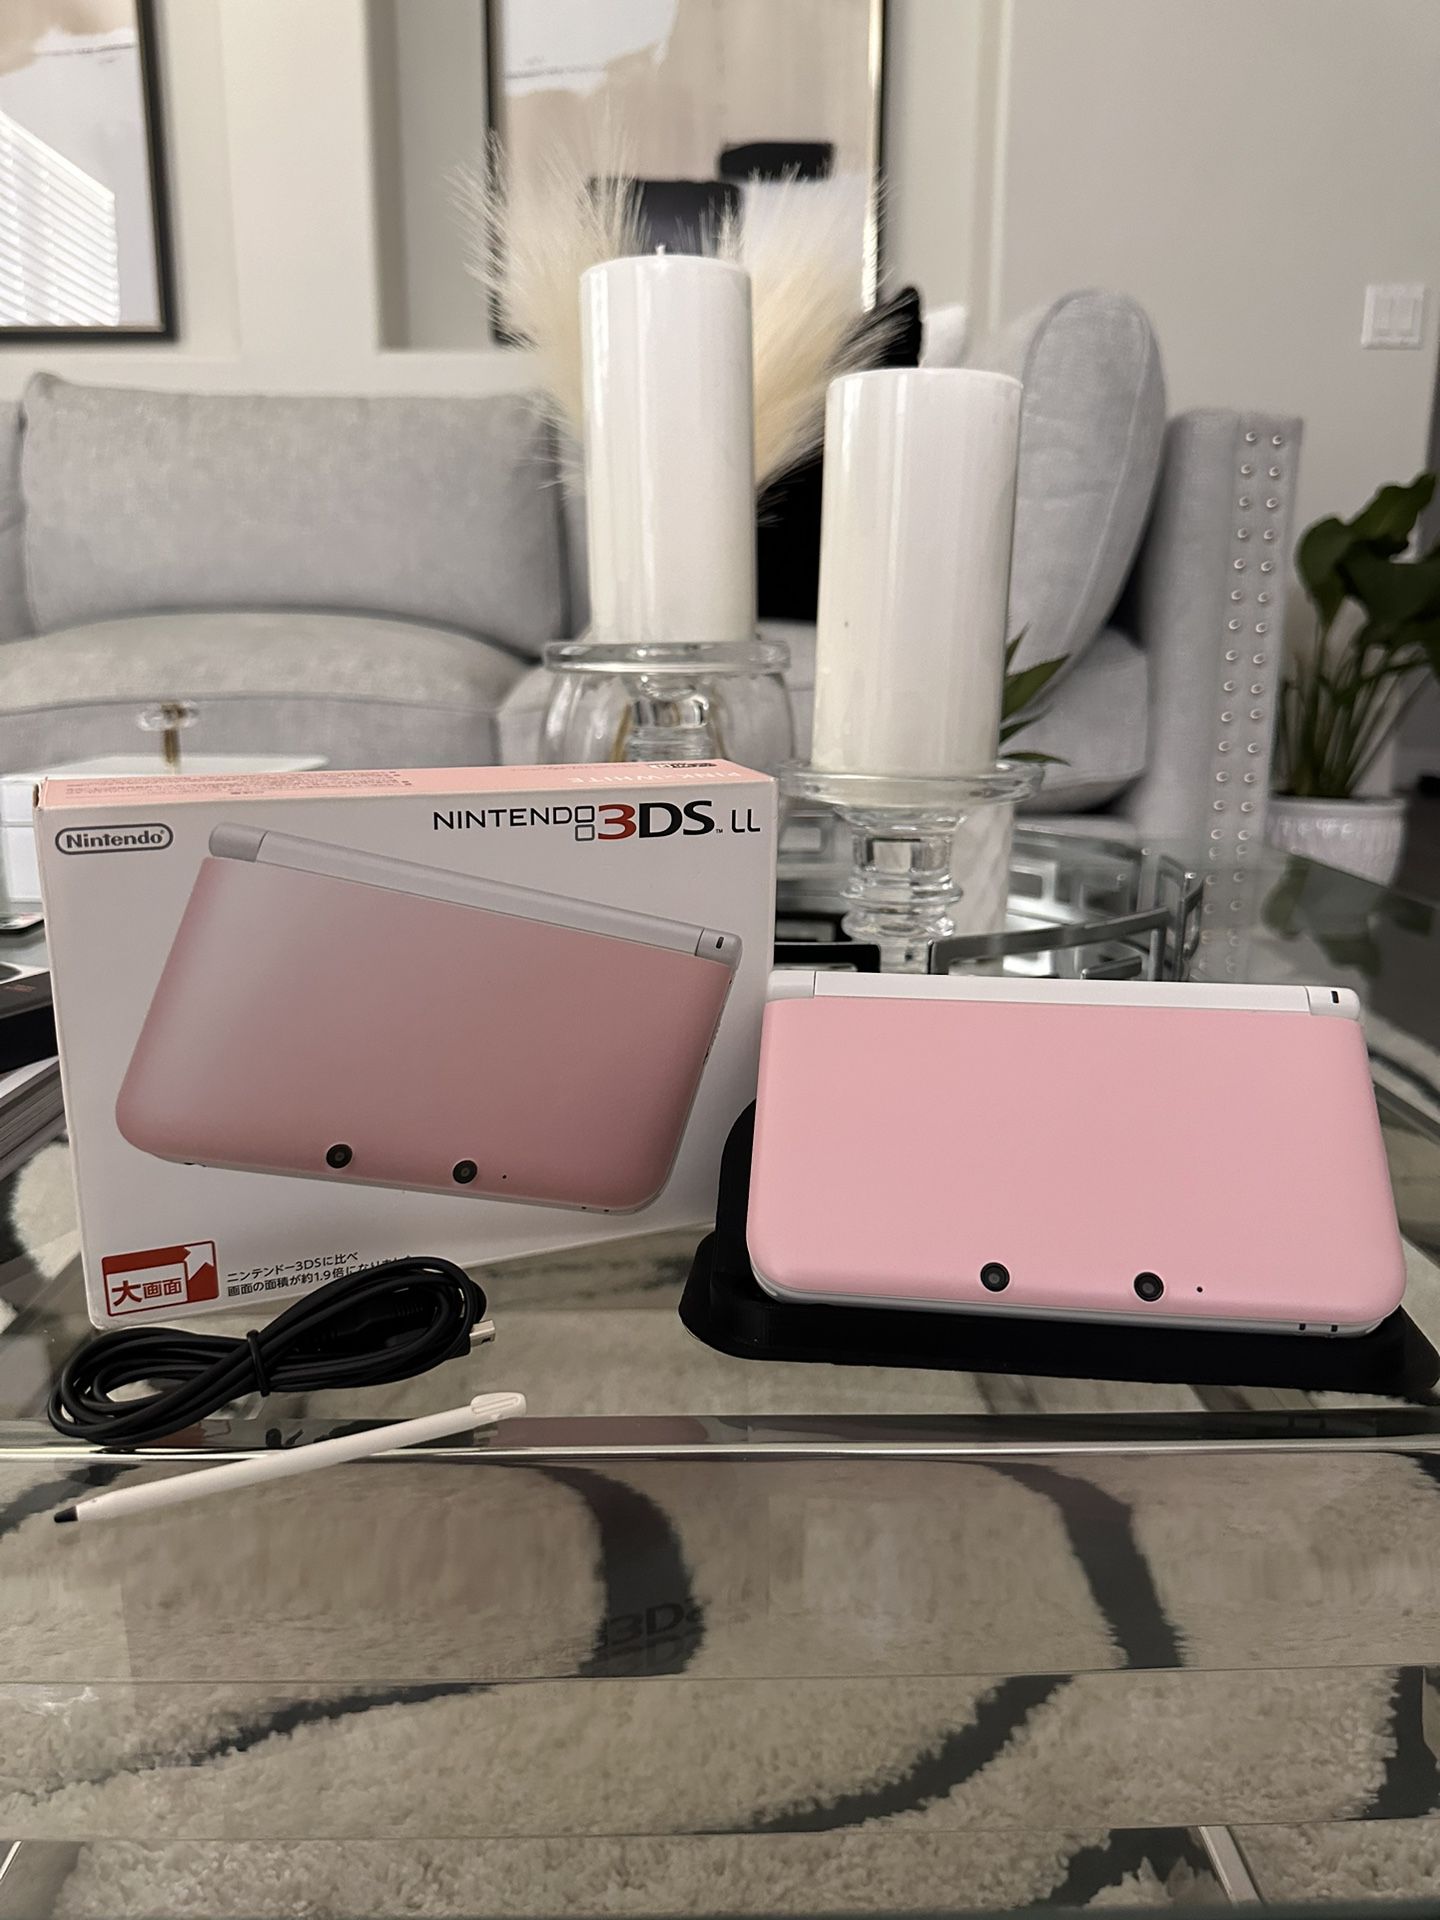 MINT Nintendo 3DS XL - Pink - Comes W/ 128 GB, Charger, and 1000+ Games